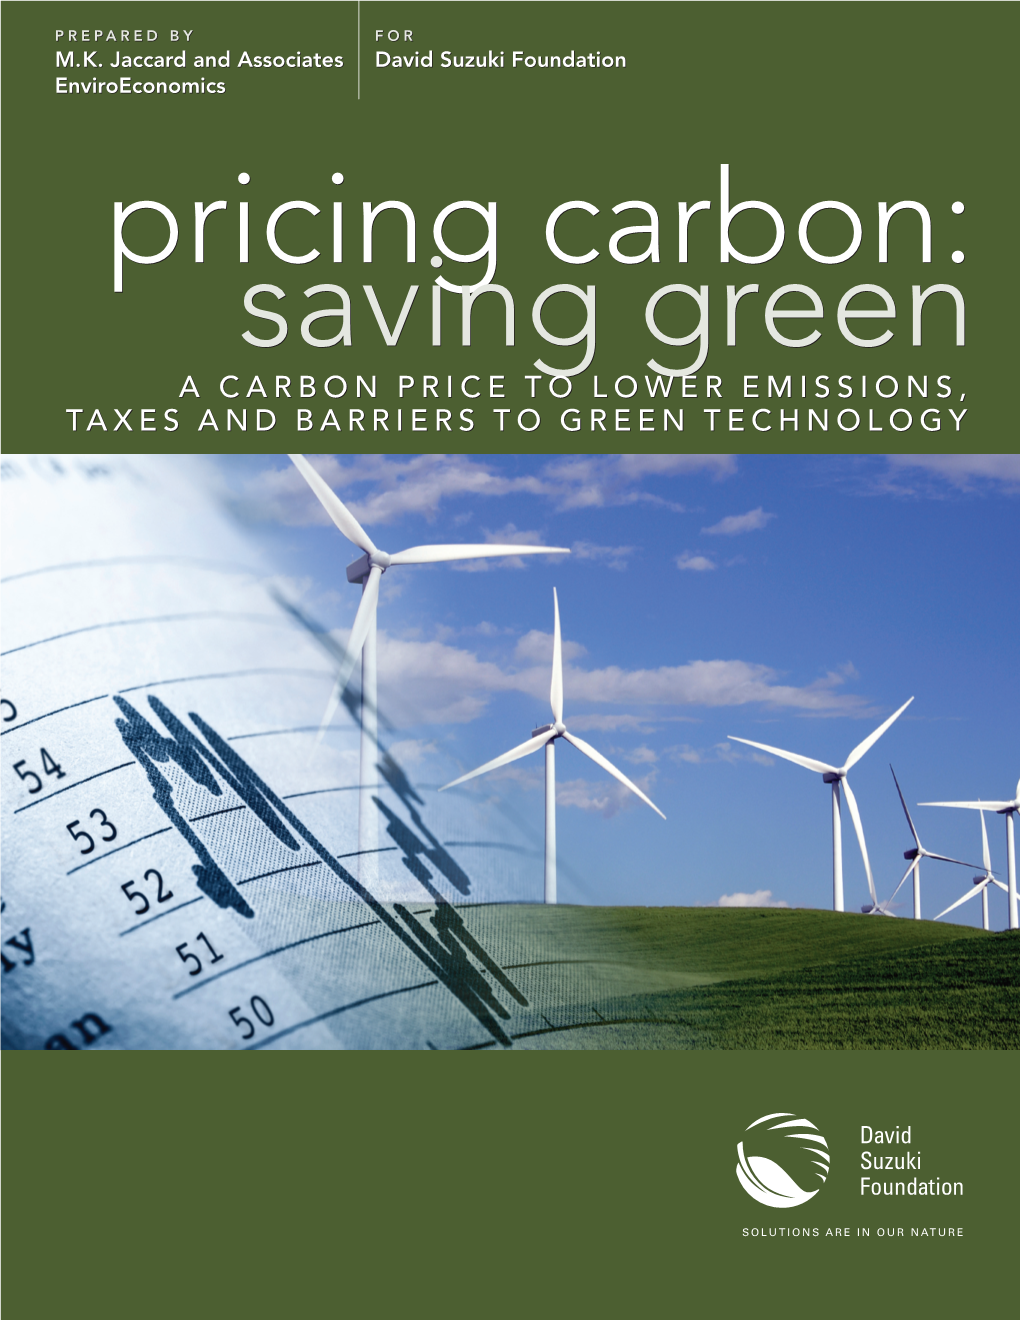 A Carbon Price to Lower Emissions, Taxes and Barriers to Green Technology